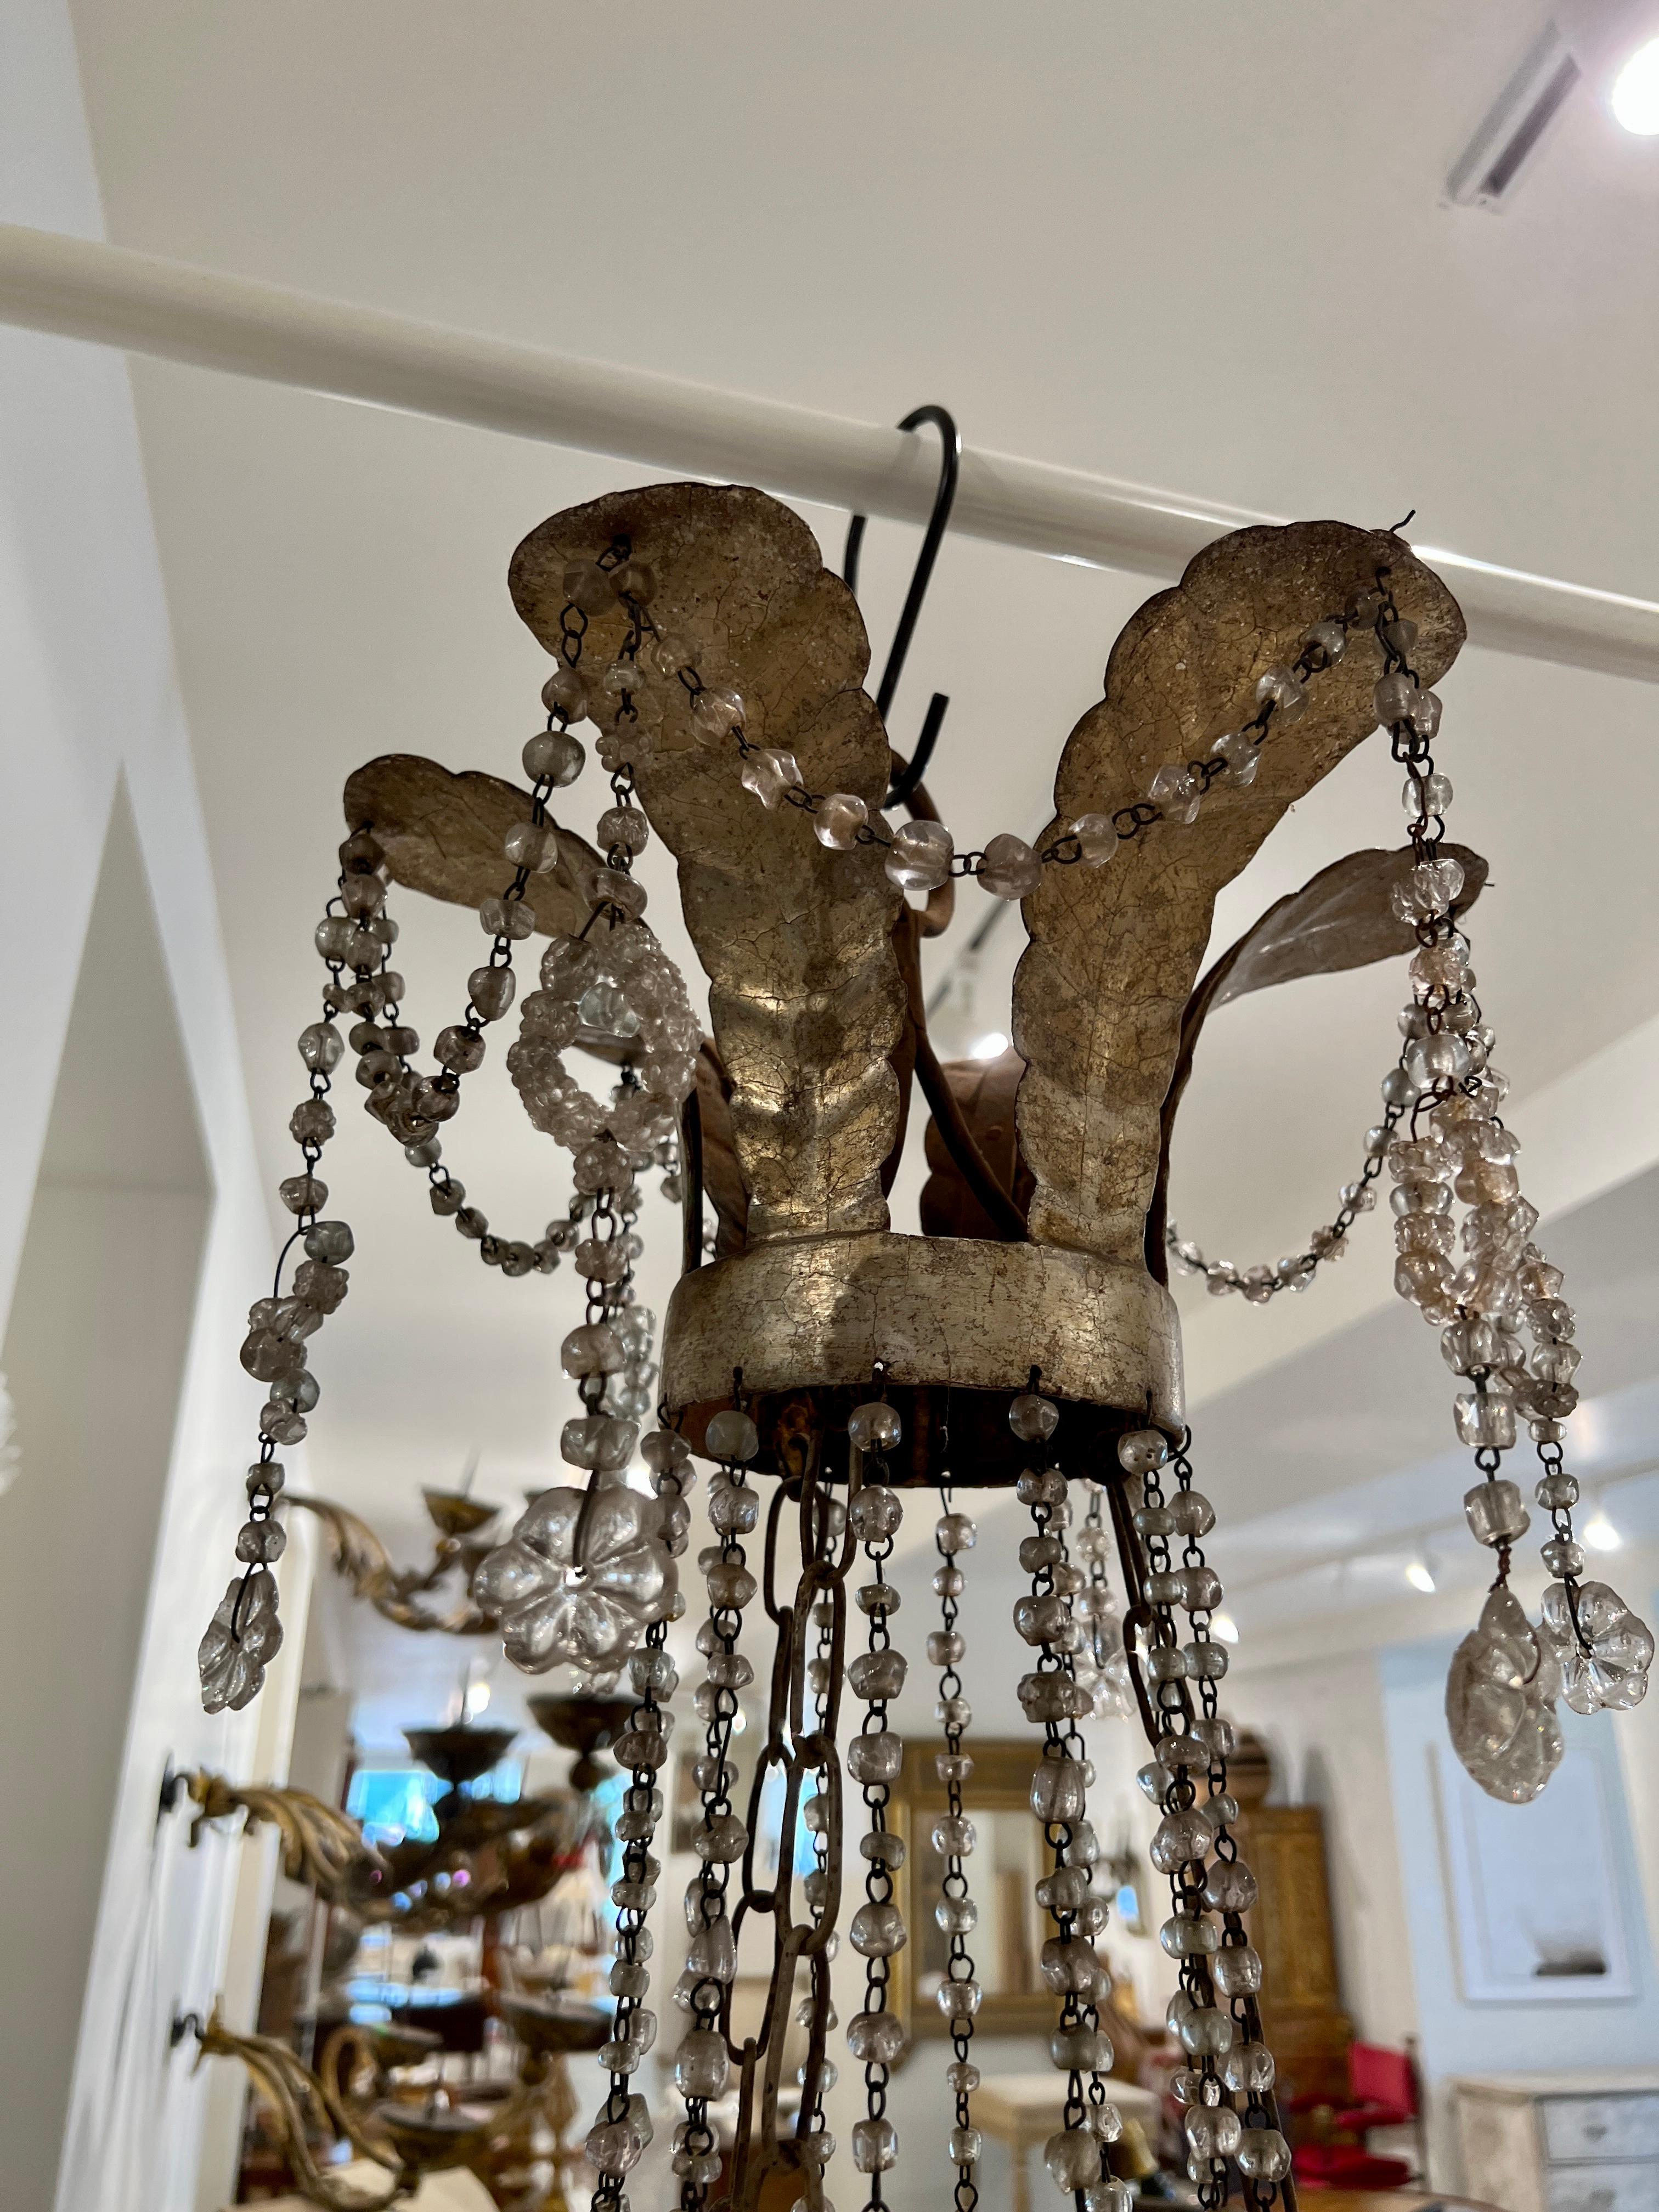 19th Century Empire Chandelier with Ancient Drops (Impero Tuscany)